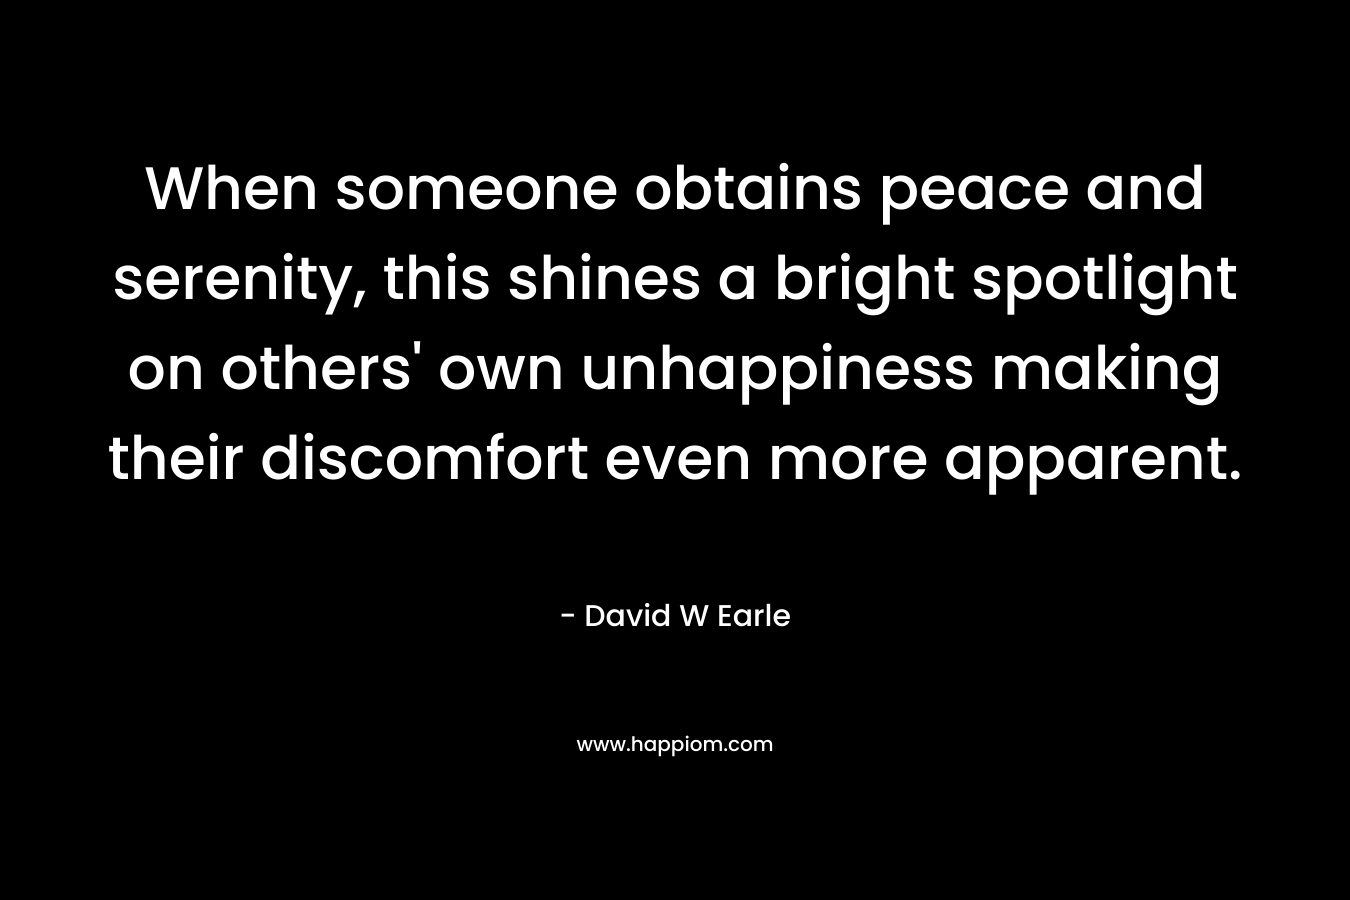 When someone obtains peace and serenity, this shines a bright spotlight on others' own unhappiness making their discomfort even more apparent.